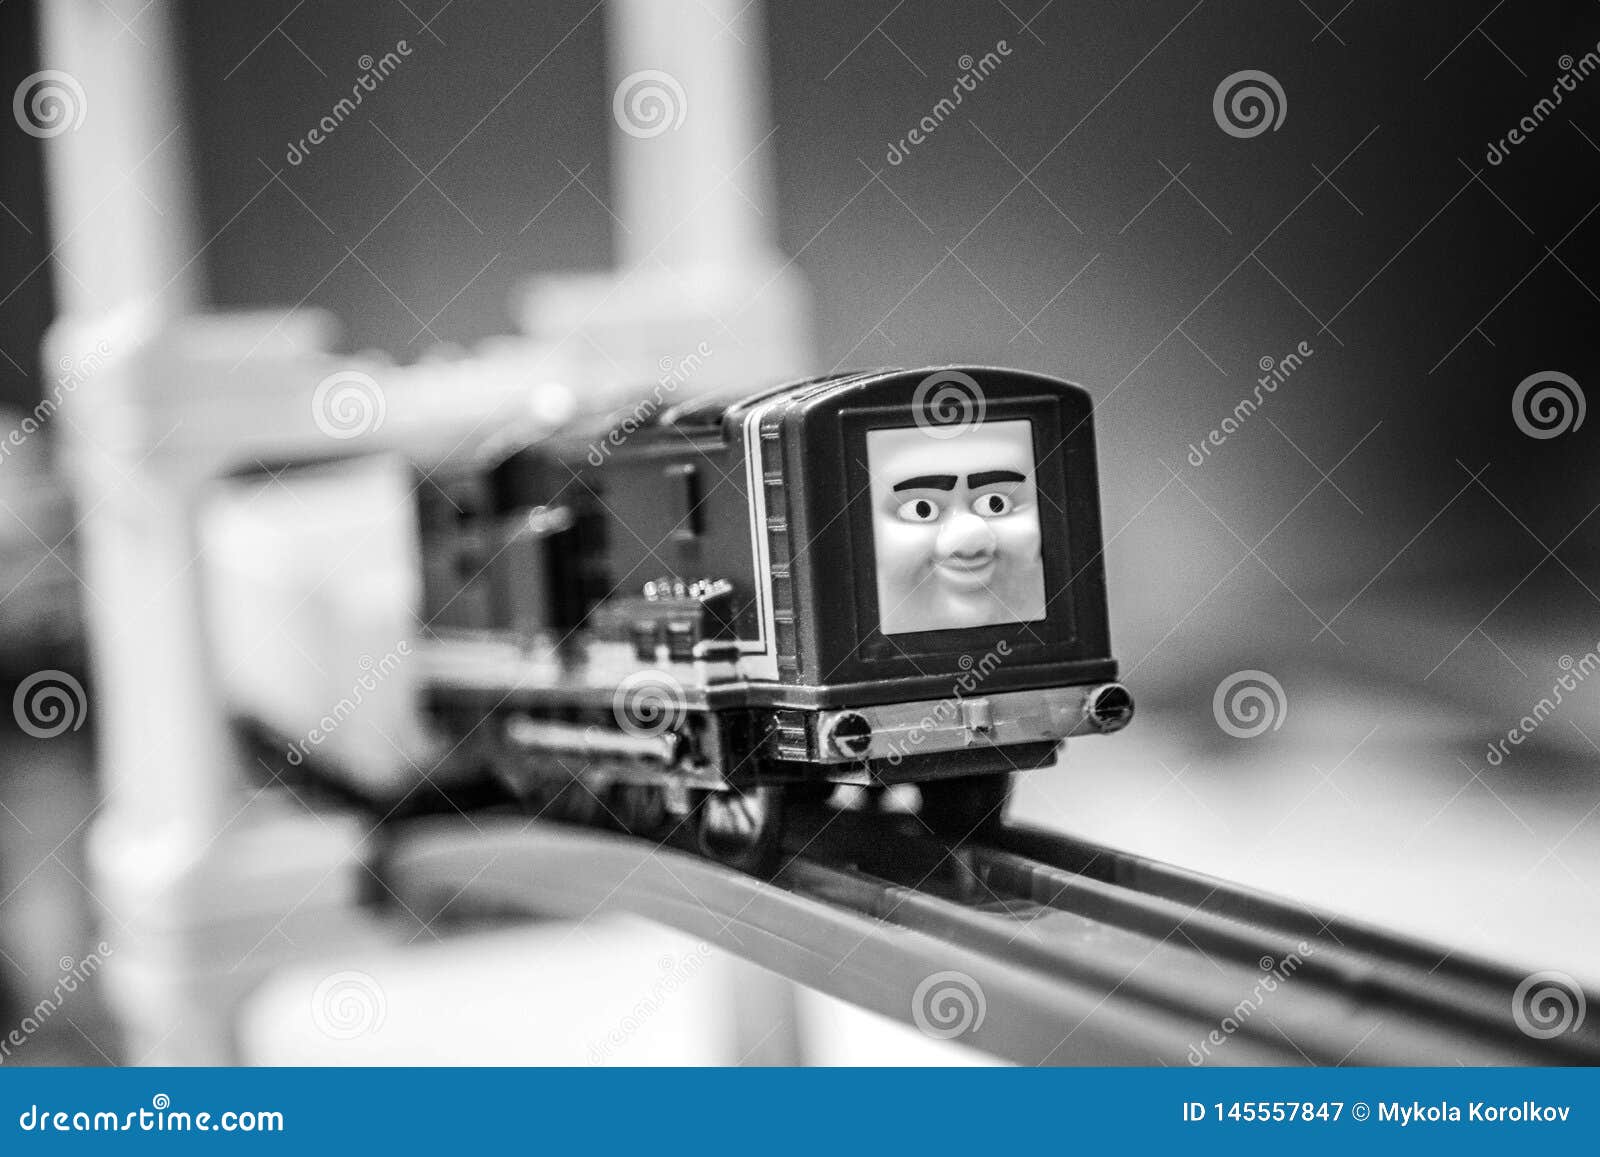 thomas and friends black and white